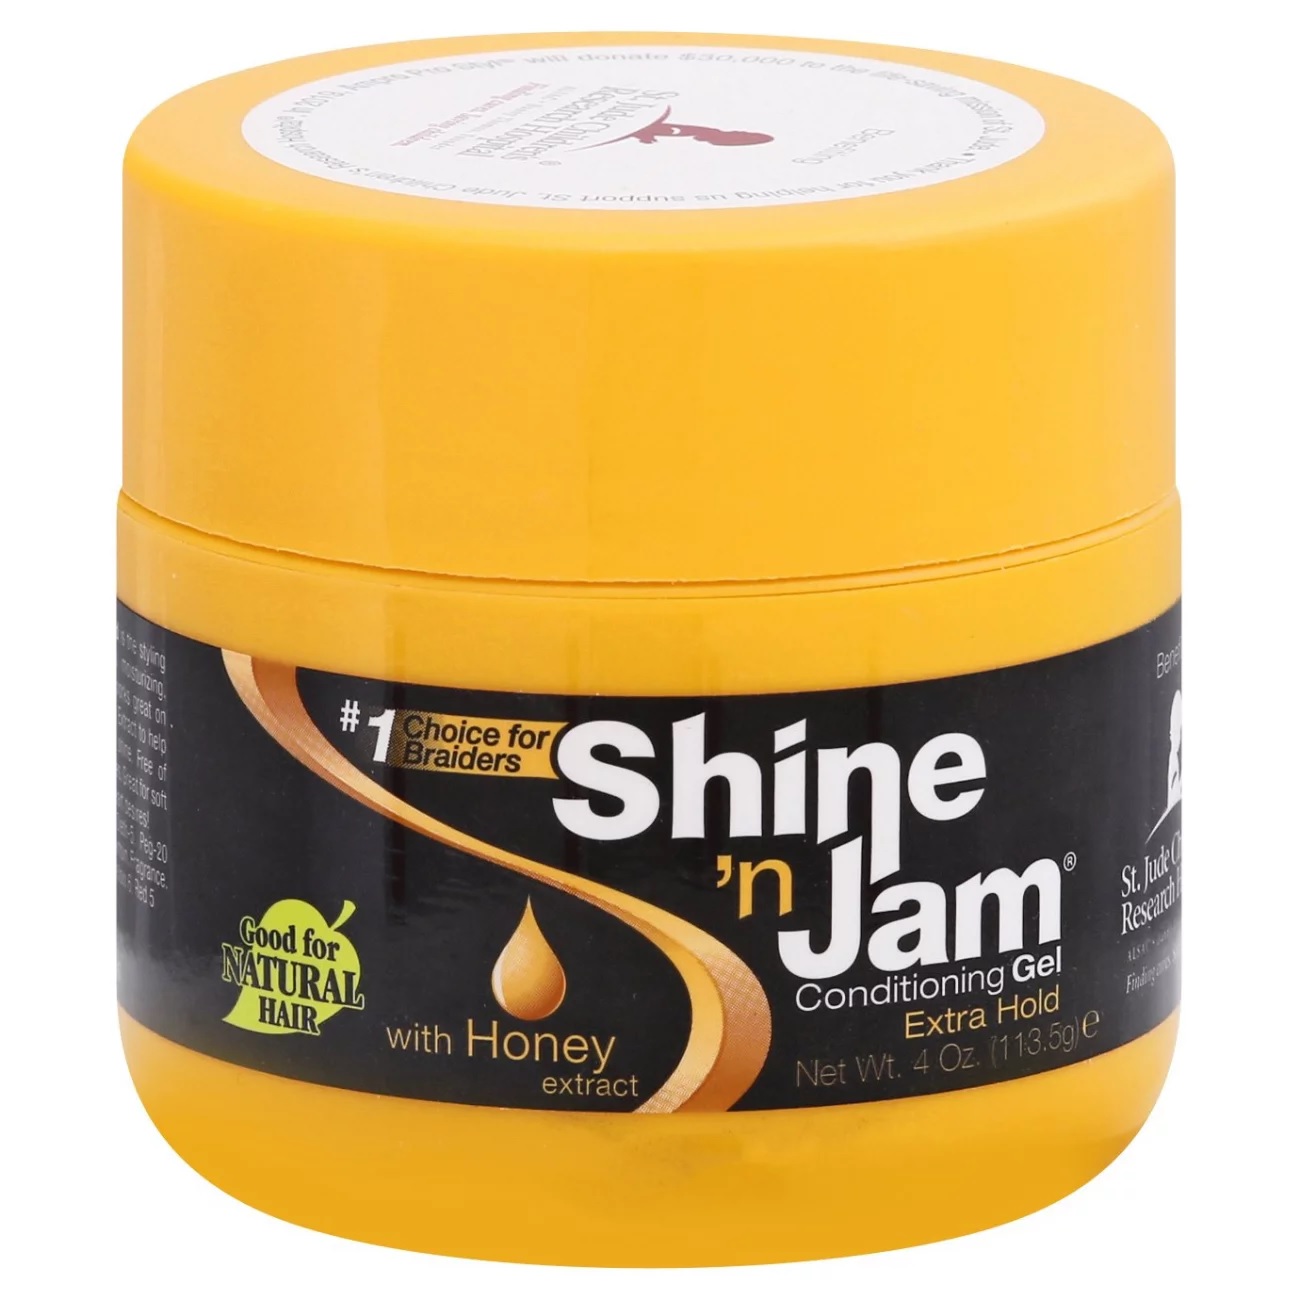 AMPRO - SHINE N JAM CONDITIONING GEL EXTRA HOLD WITH HONEY EXTRACT, SALON SIZE 4 OZ / 113.5 G